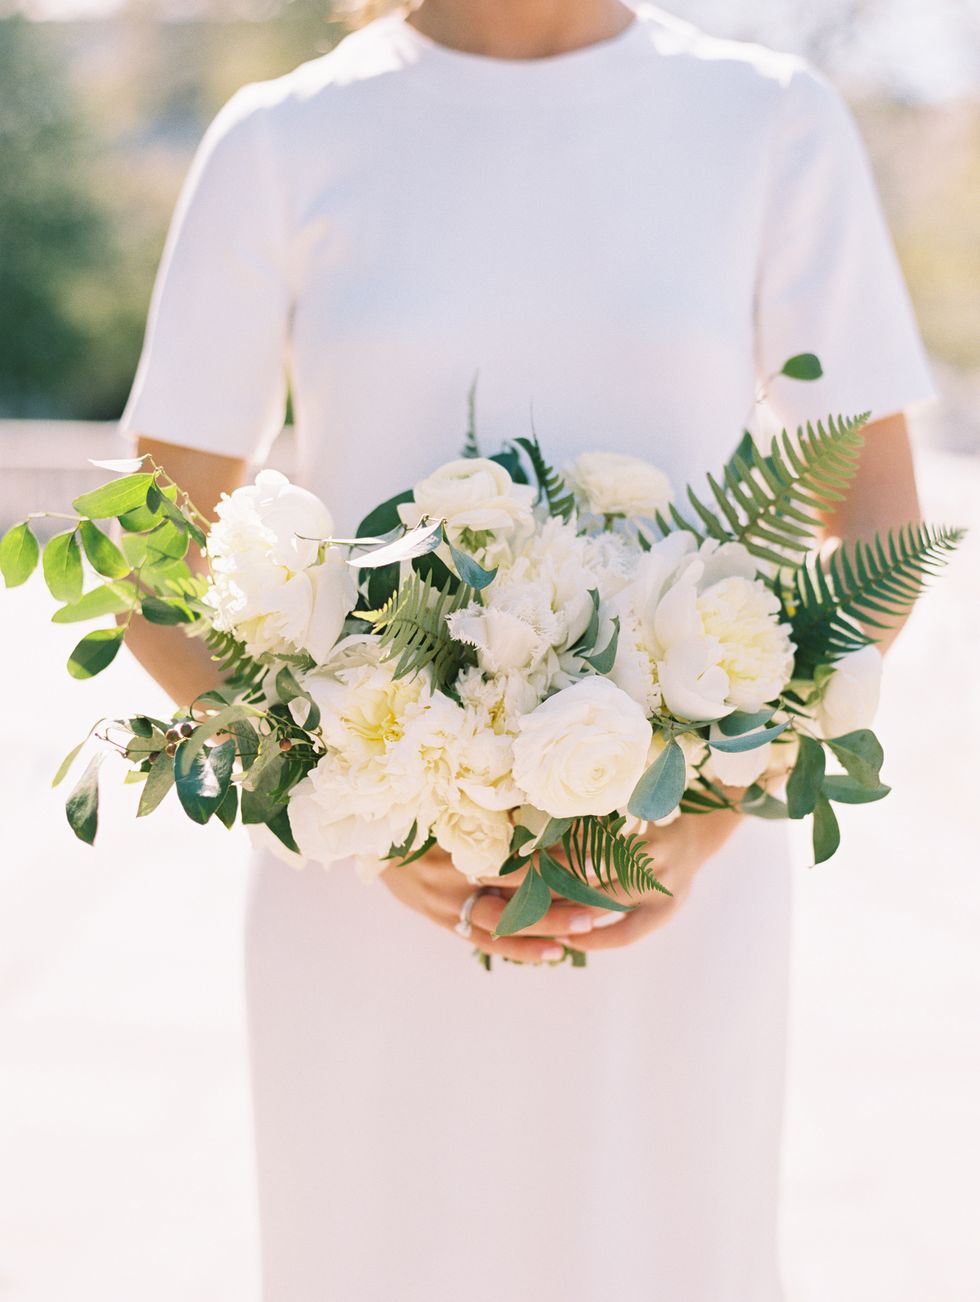 <p>"From the beginning, I knew I wanted to go with white flowers," said the bride. "We had a mix of different flowers, but my favorites were the fringe tulips." <a href="http://sweetrootvillage.com/" target="_blank" tabindex="-1">Sweet Root Village</a><u> </u>created her clean, white bouquet, which also included smilax vines, garden roses, spray roses, ranunculus, peonies, and a mix of greenery.</p>